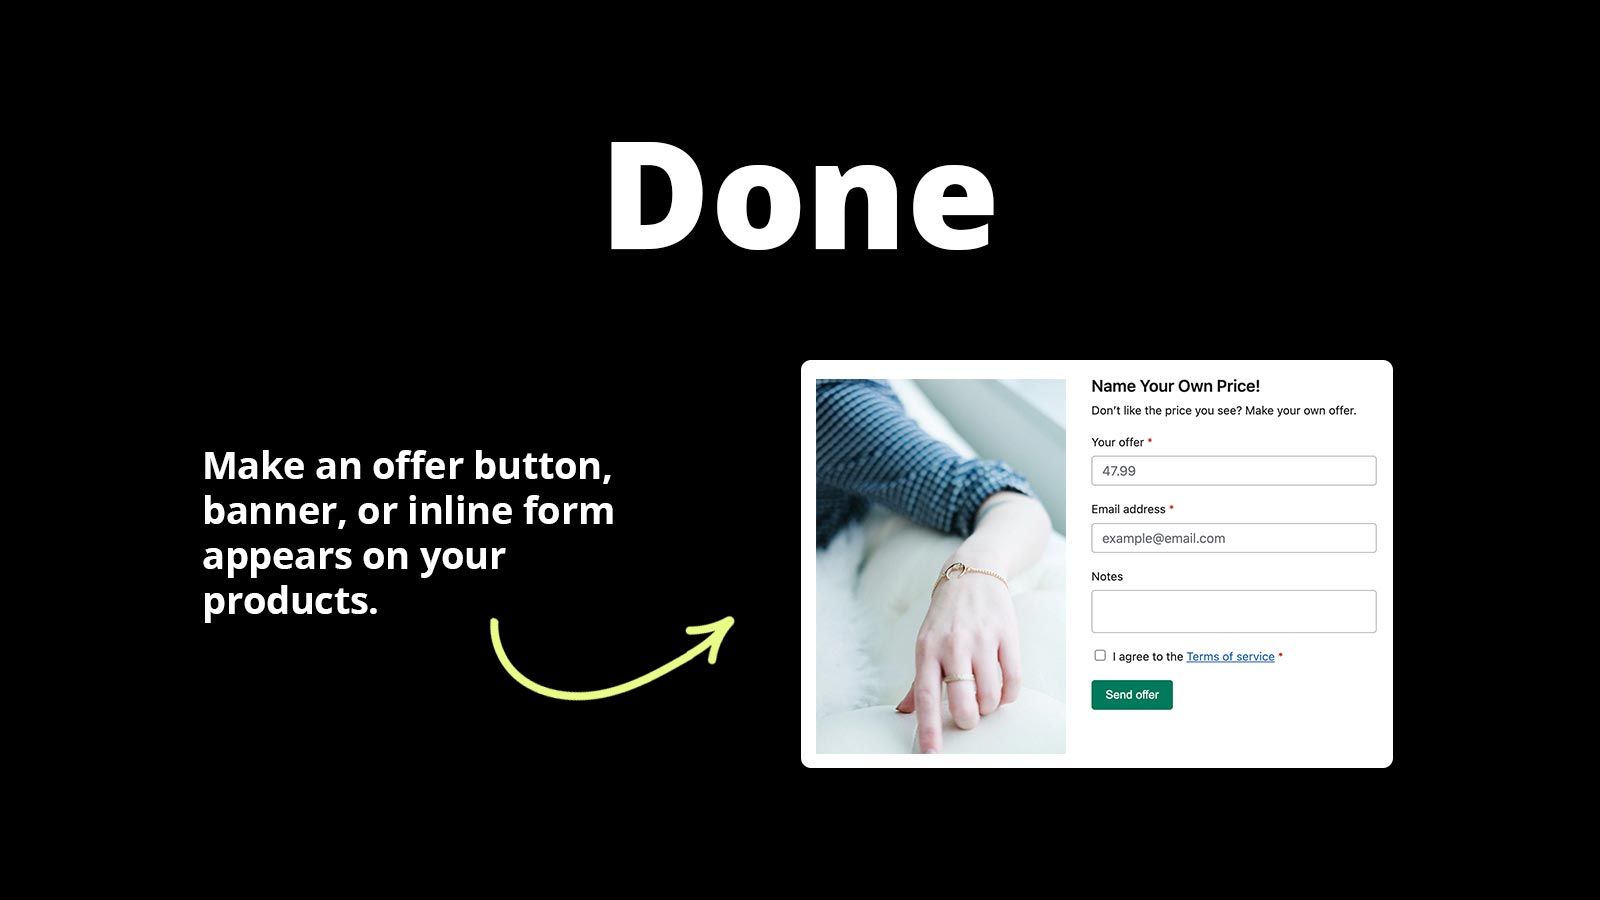 Done - Make an offer button, banner, or inline forms appear